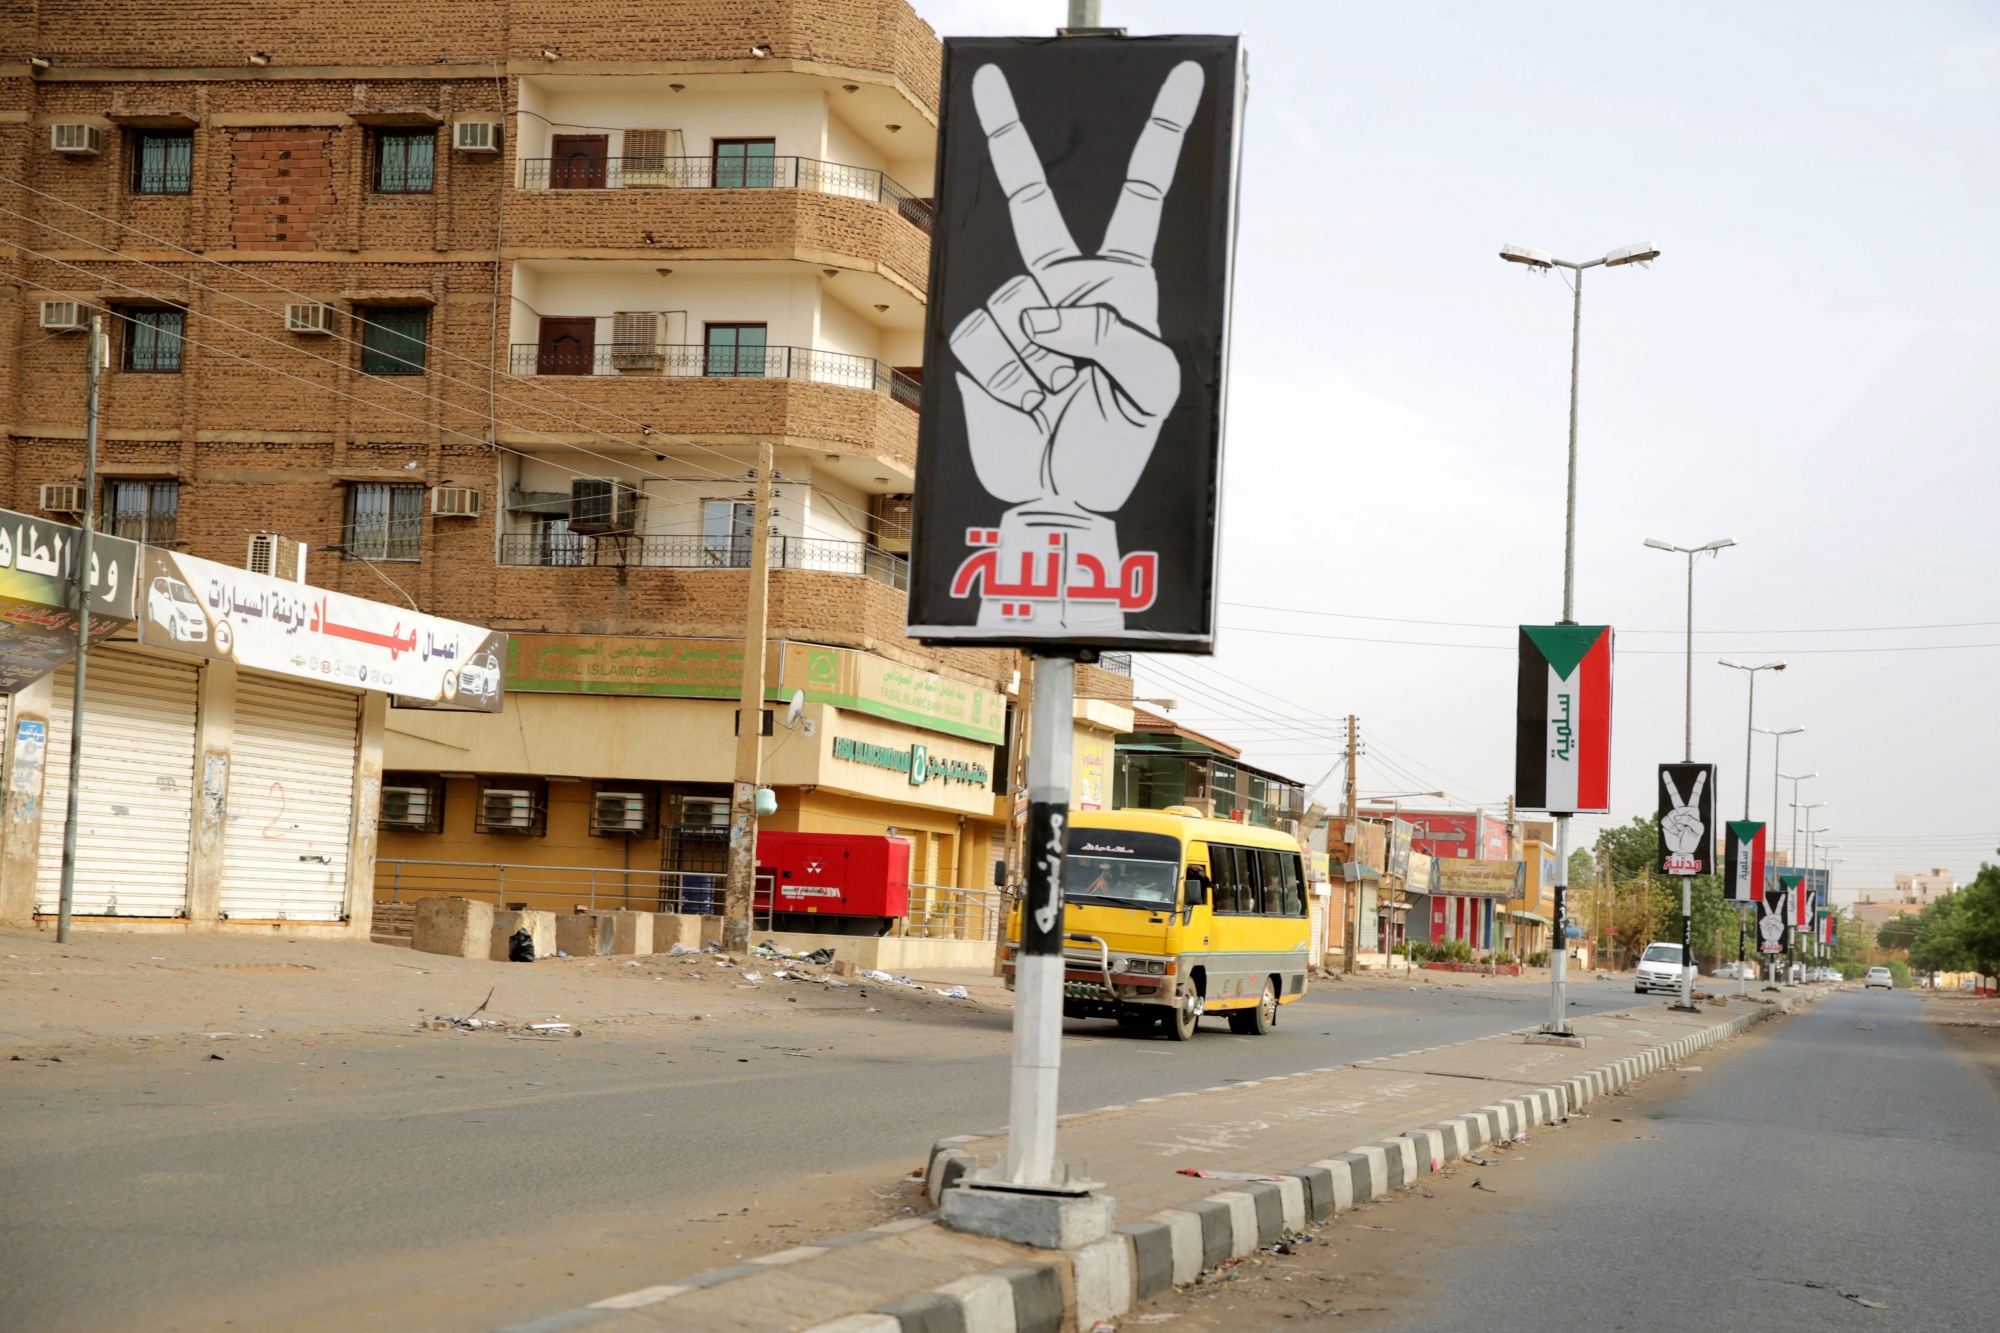 epa07640403 Vehicles drive on an almost deserted street near placards hanging on lighting poles reading in Arabic 'civilian' and 'peaceful' during the third day of 'Civil Disobedience' campaign in Khartoum, Sudan, 11 June 2019. According to local sources, several shops and banks remained closed and streets almost deserted on the third day of a 'Civil Disobedience' campaign called by Sudanese protest group in the wake of a deadly attack on protesters. The Sudanese Professionals Association (SPA) said the campaign would run until a civilian government was put in charge by the country's ruling generals.  EPA/MARWAN ALI SUDAN CIVIL DISOBEDIENCE